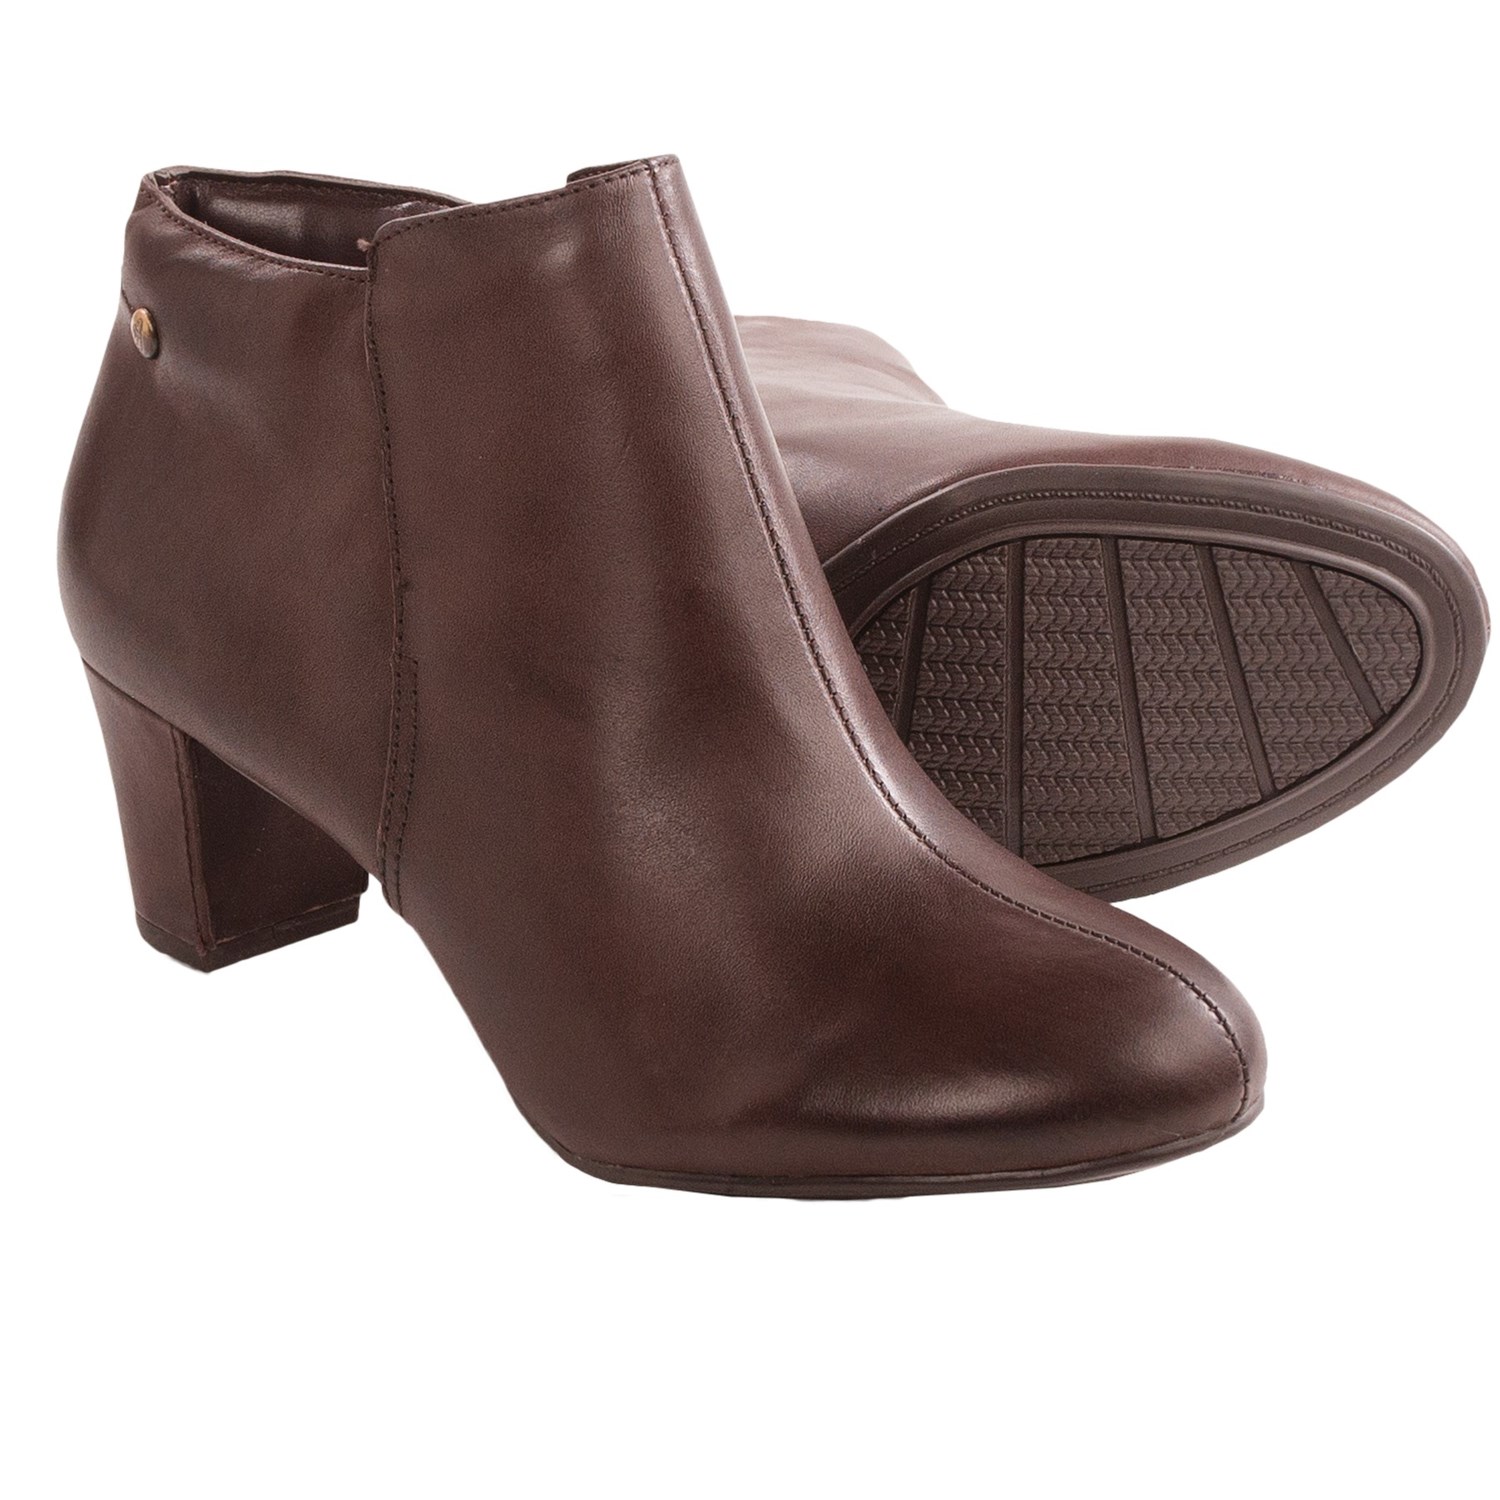 Hush Puppies Corie Imagery Boots (For Women) in Dark Brown Leather